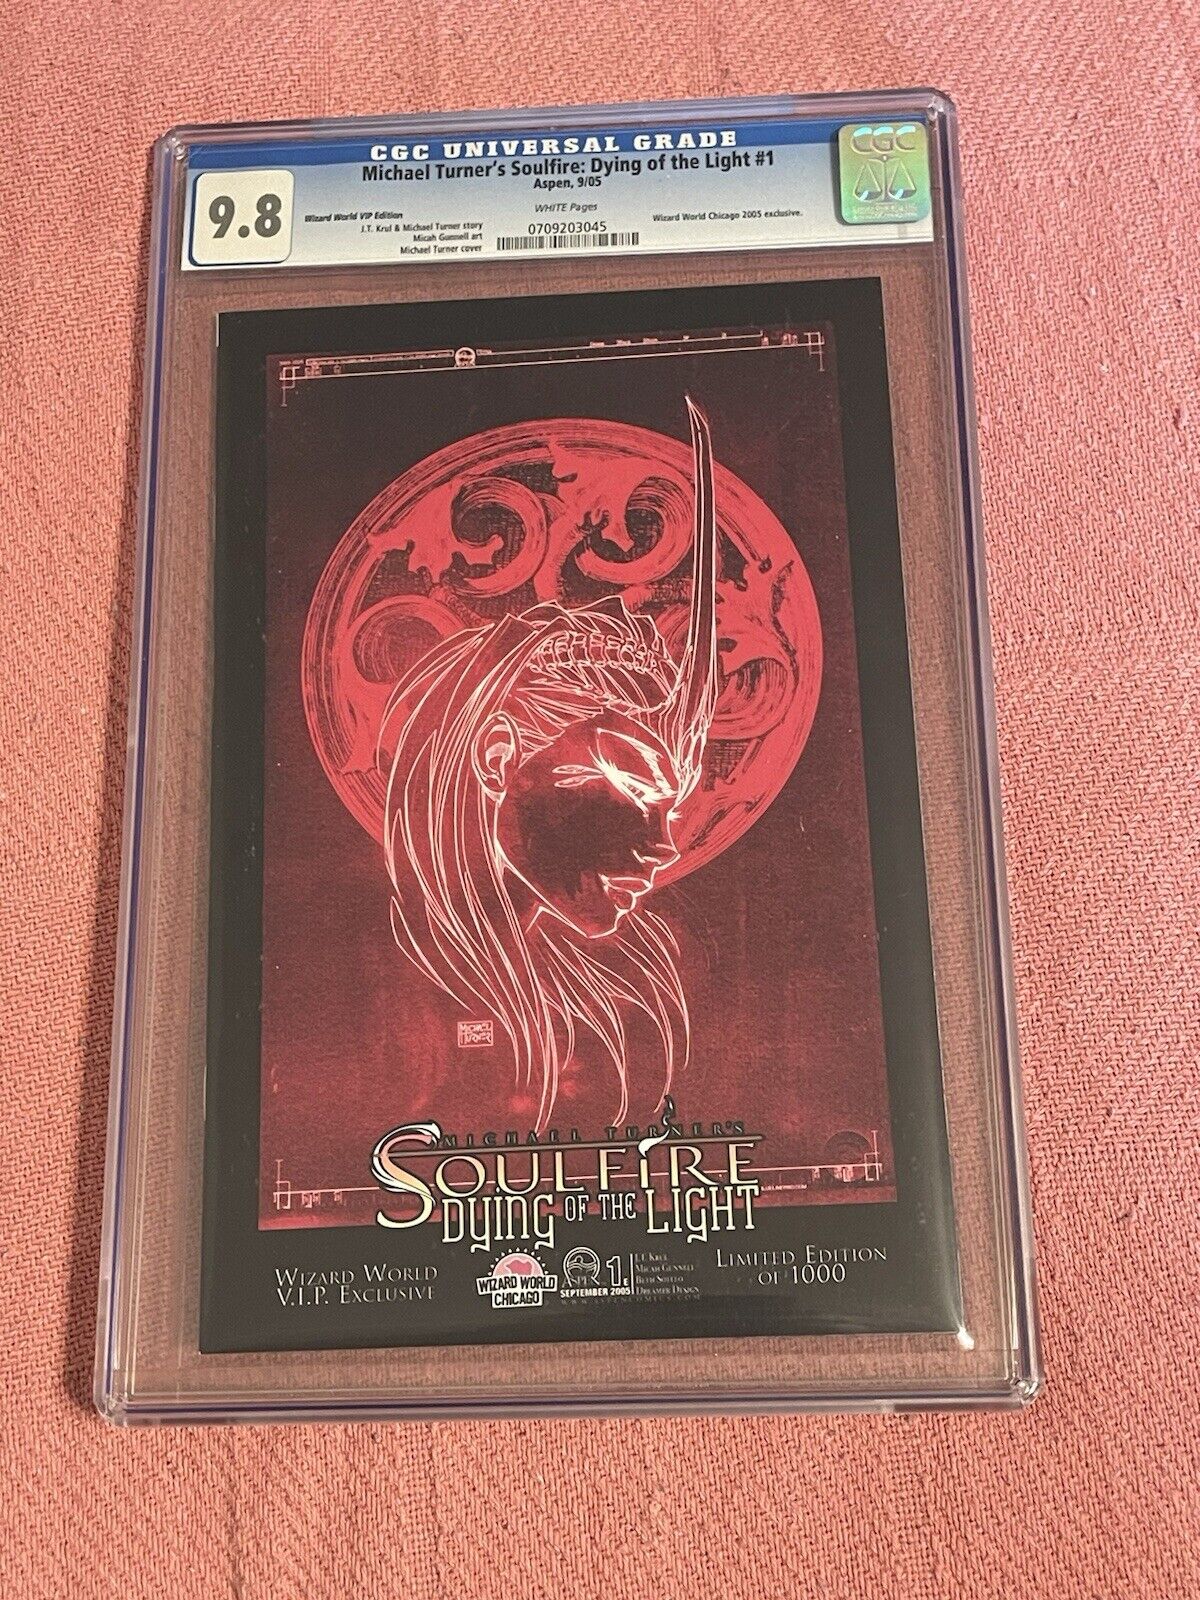 Michael Turner Soulfire: Dying of the Light #1 & #3 CGC 9.8, Wizard World, Lot